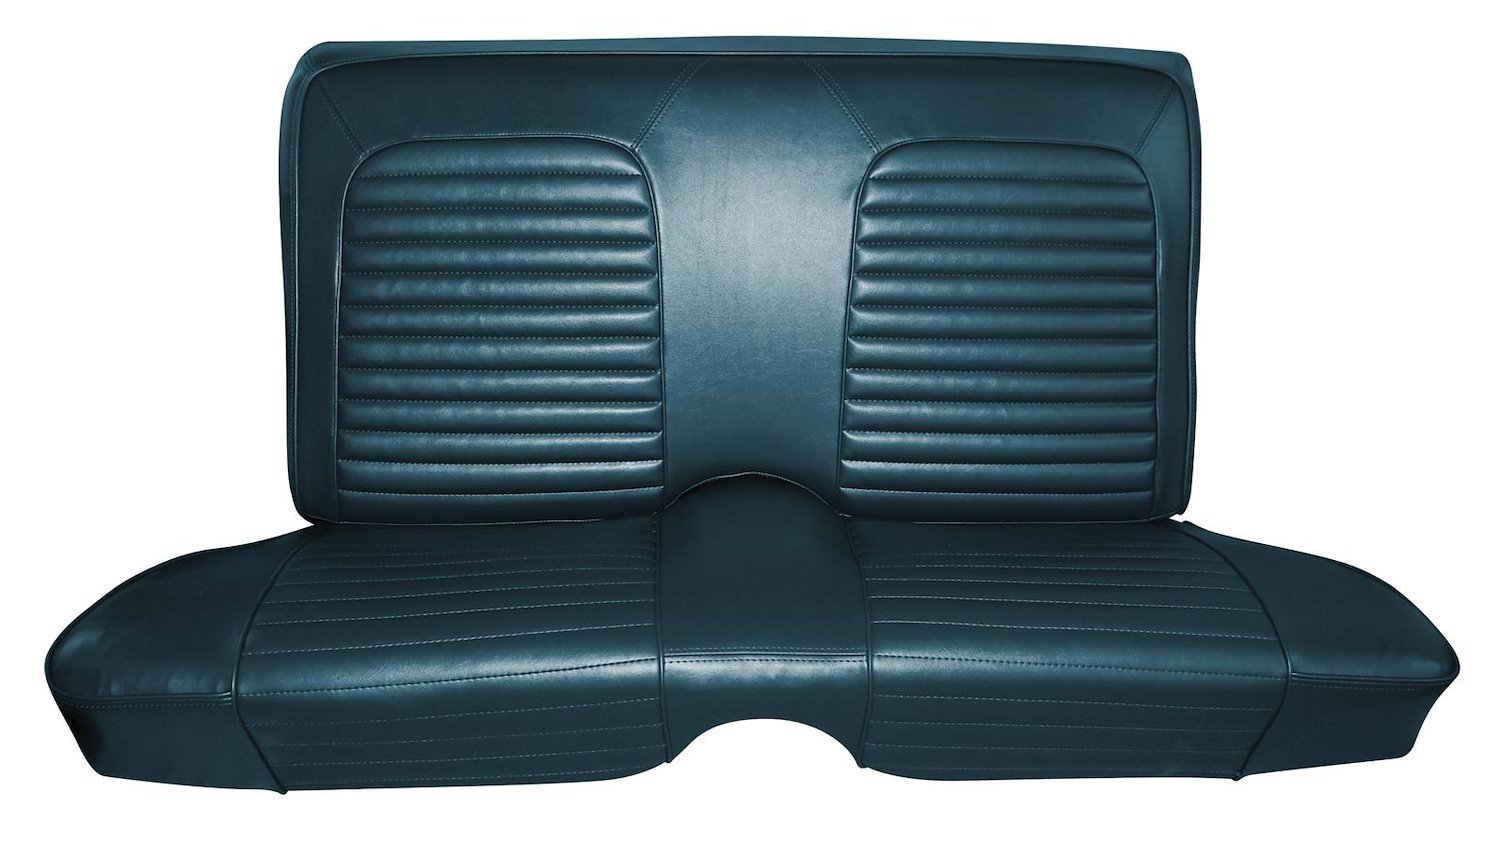 1966 Chevrolet Chevelle Malibu and Super Sport Convertible Two-Tone Interior Rear Bench Seat Upholstery Set